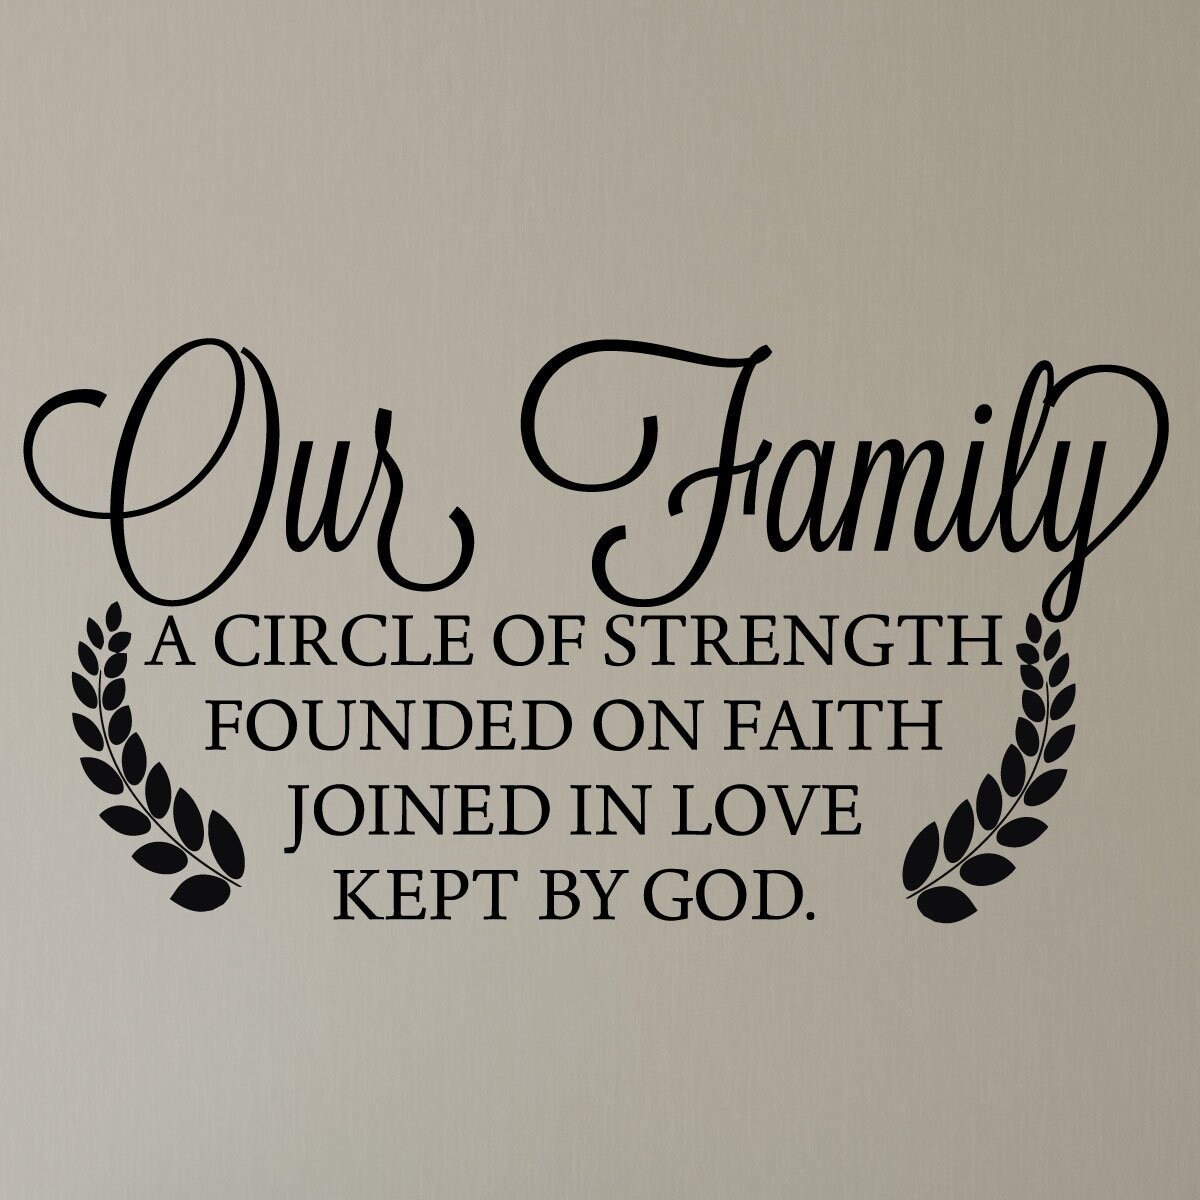 Family Wall Decor Our Family A Circle of Strength Founded on | Etsy